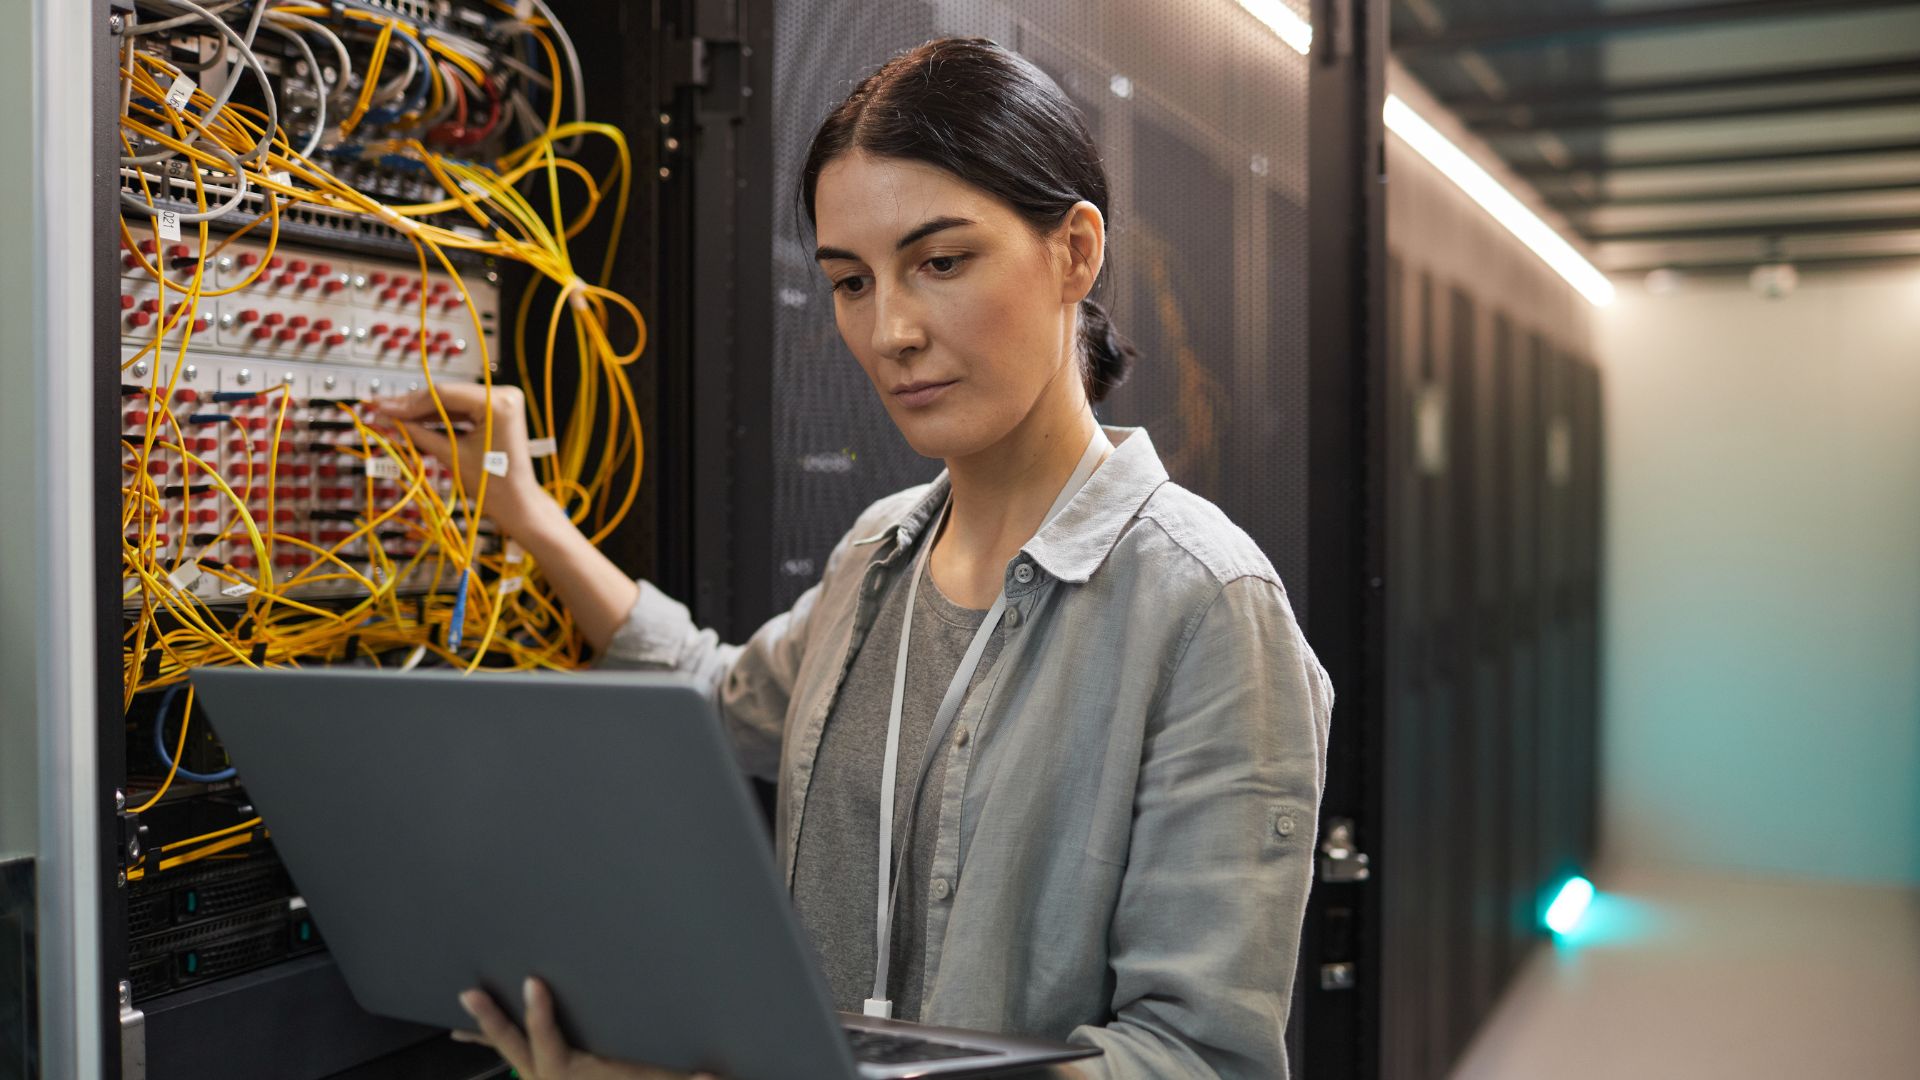 We keep your business connected with secure, fast, and reliable computer networking support.